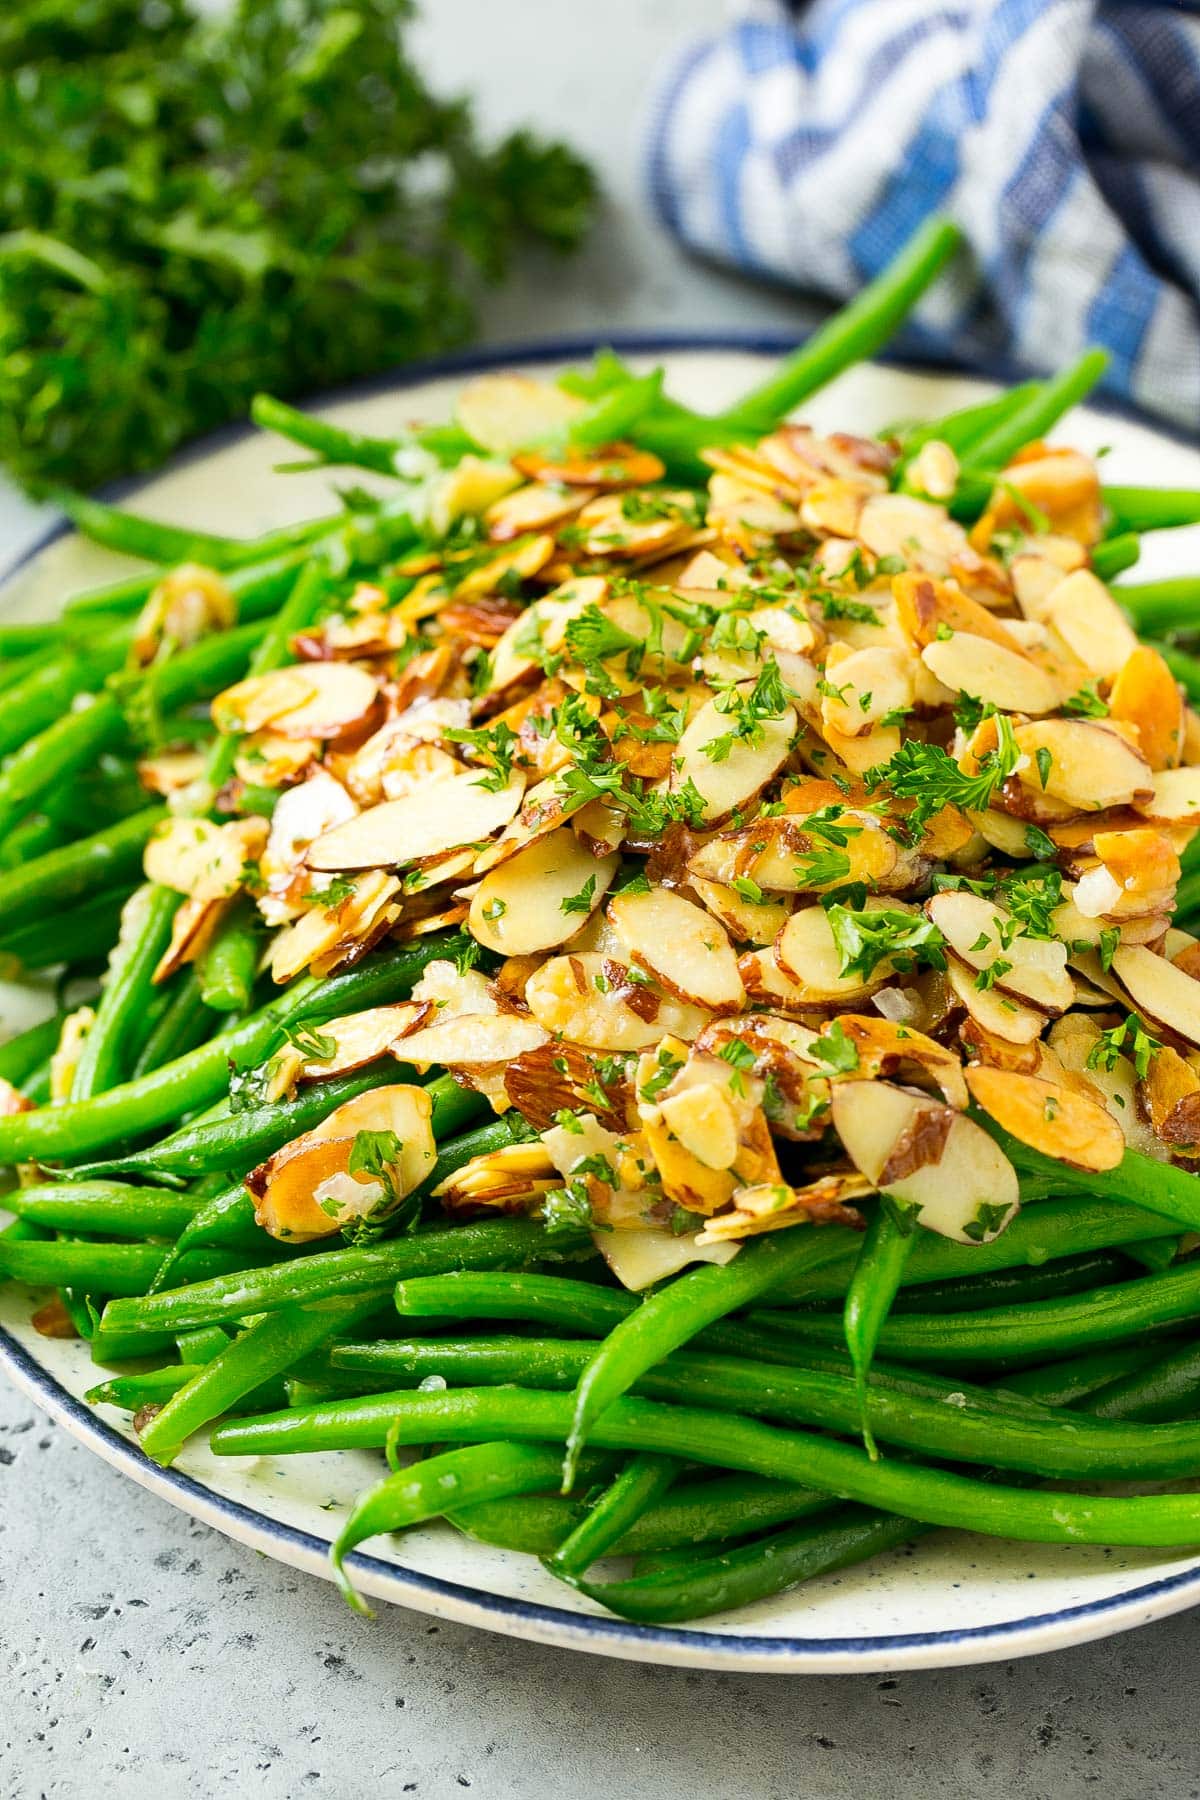 A serving plate of green beans almondine.